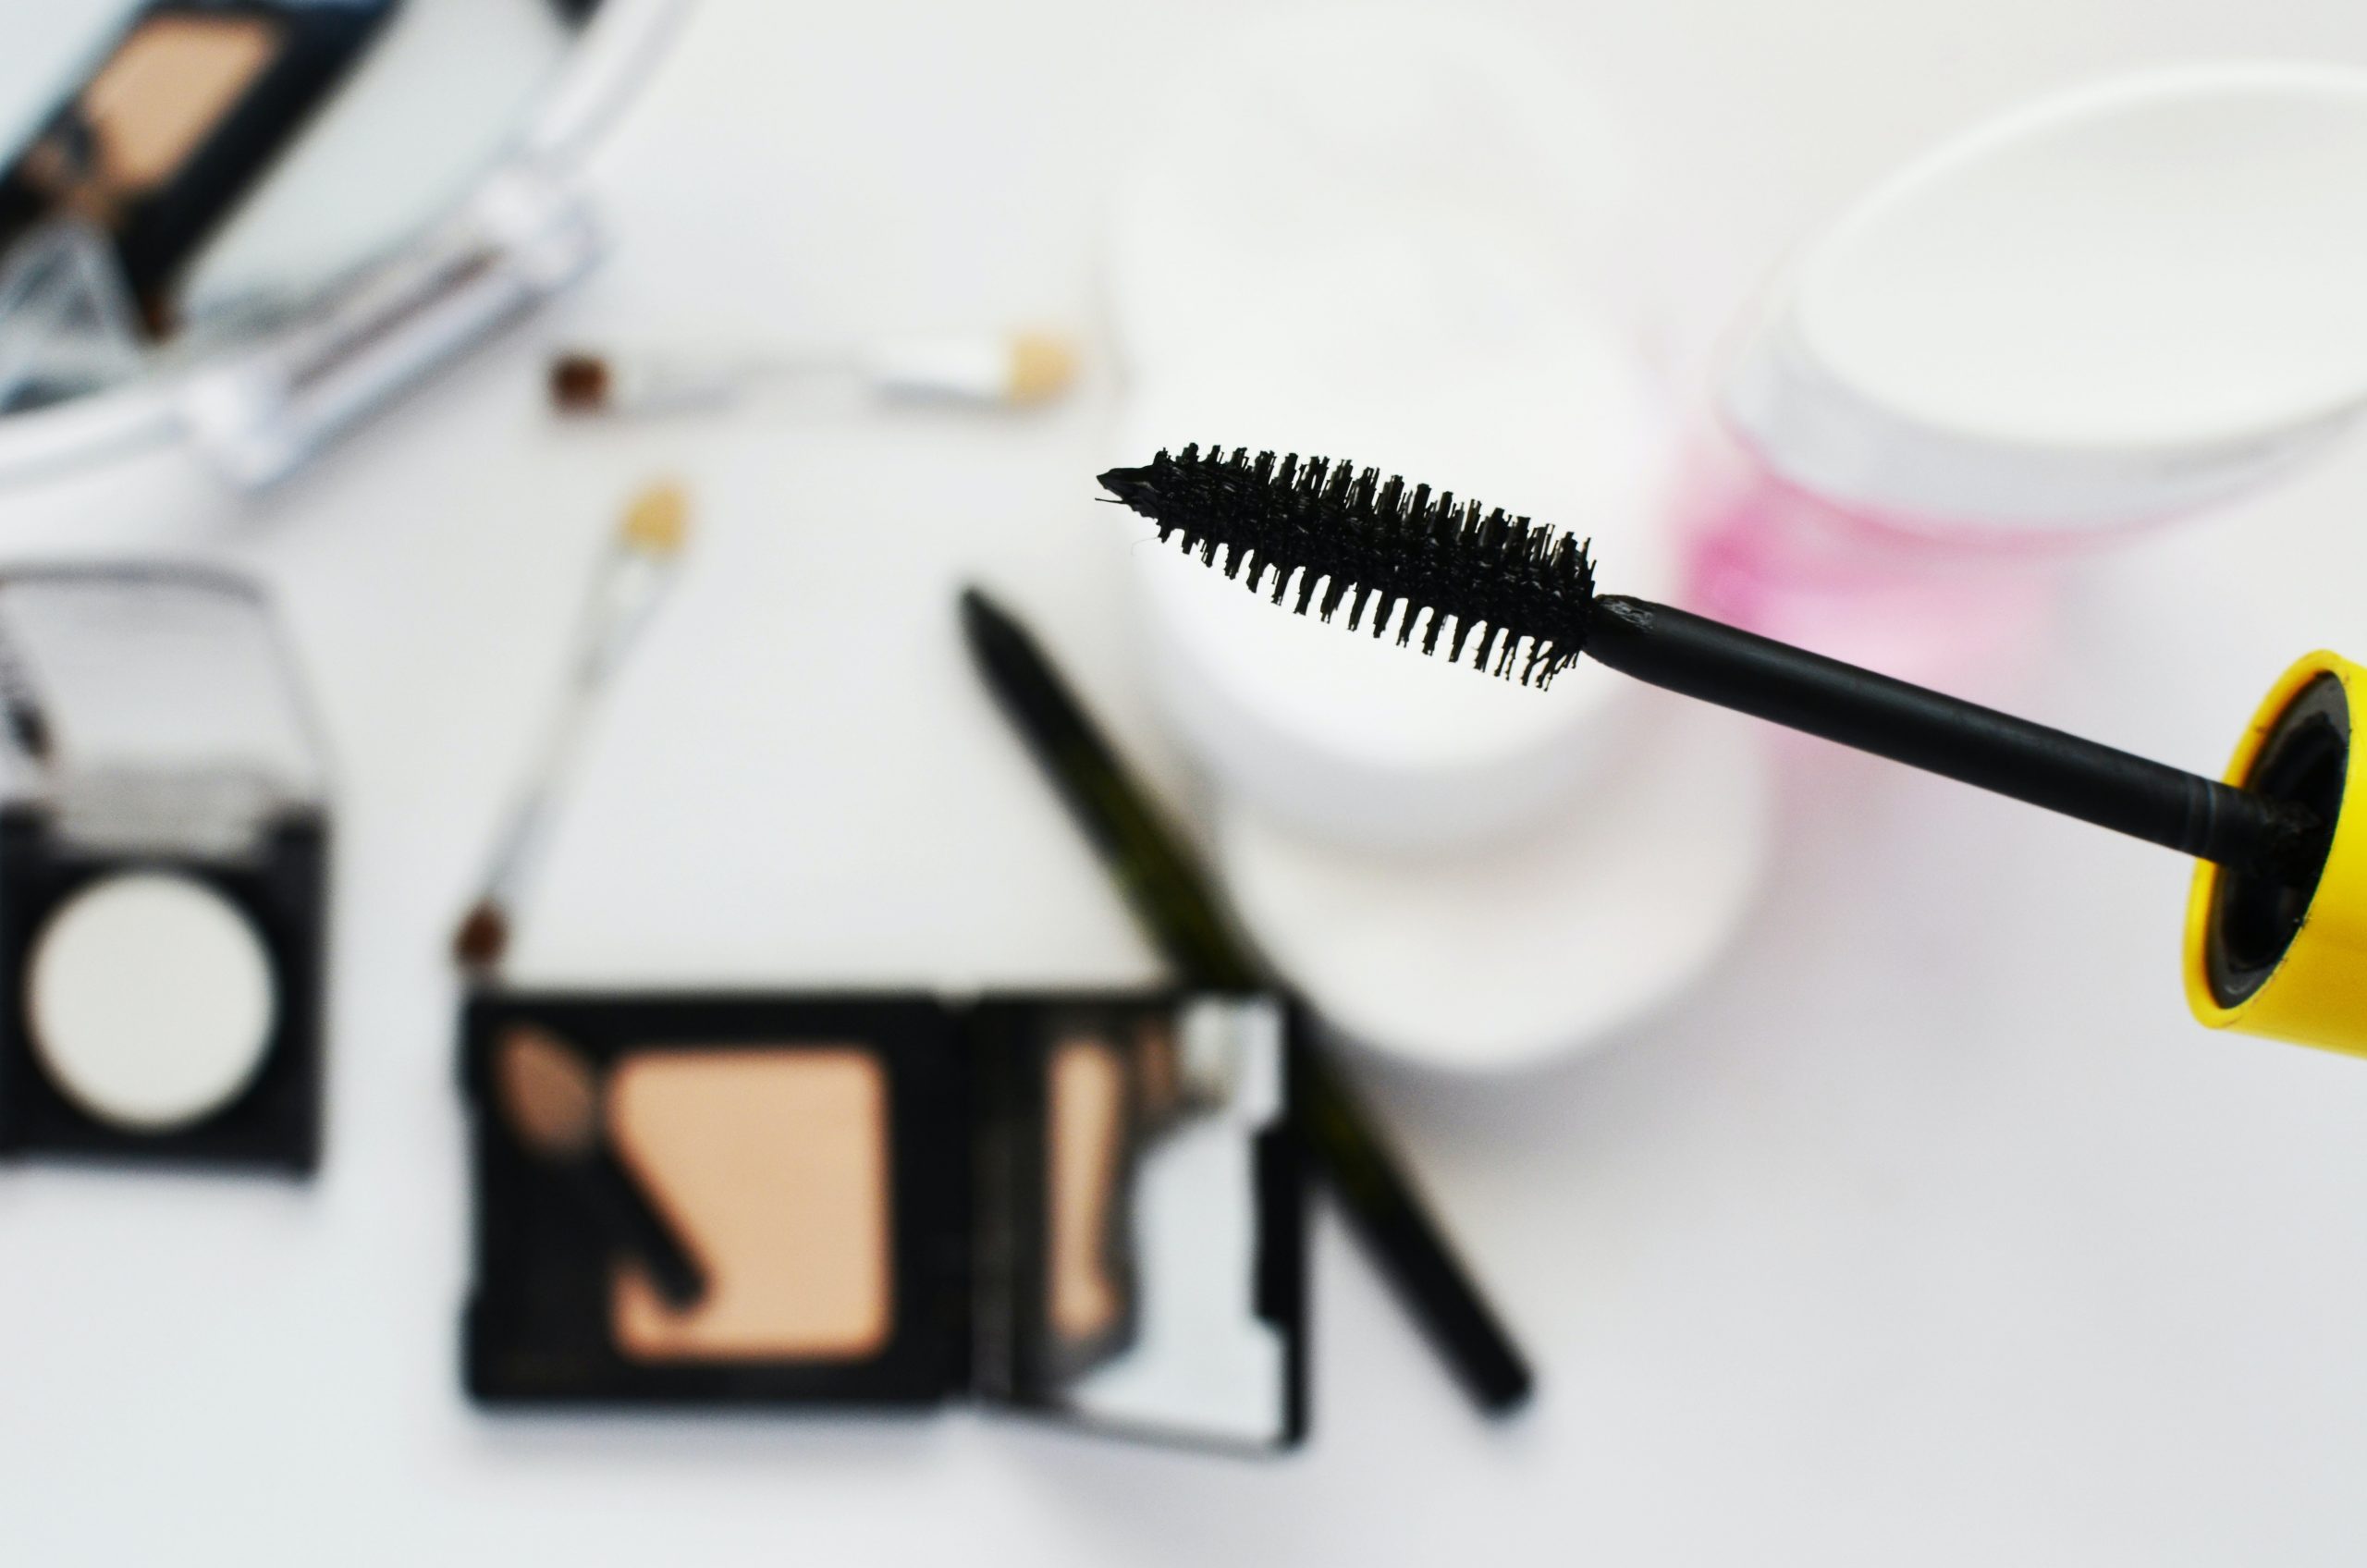 Dried out mascara? We know how to save it